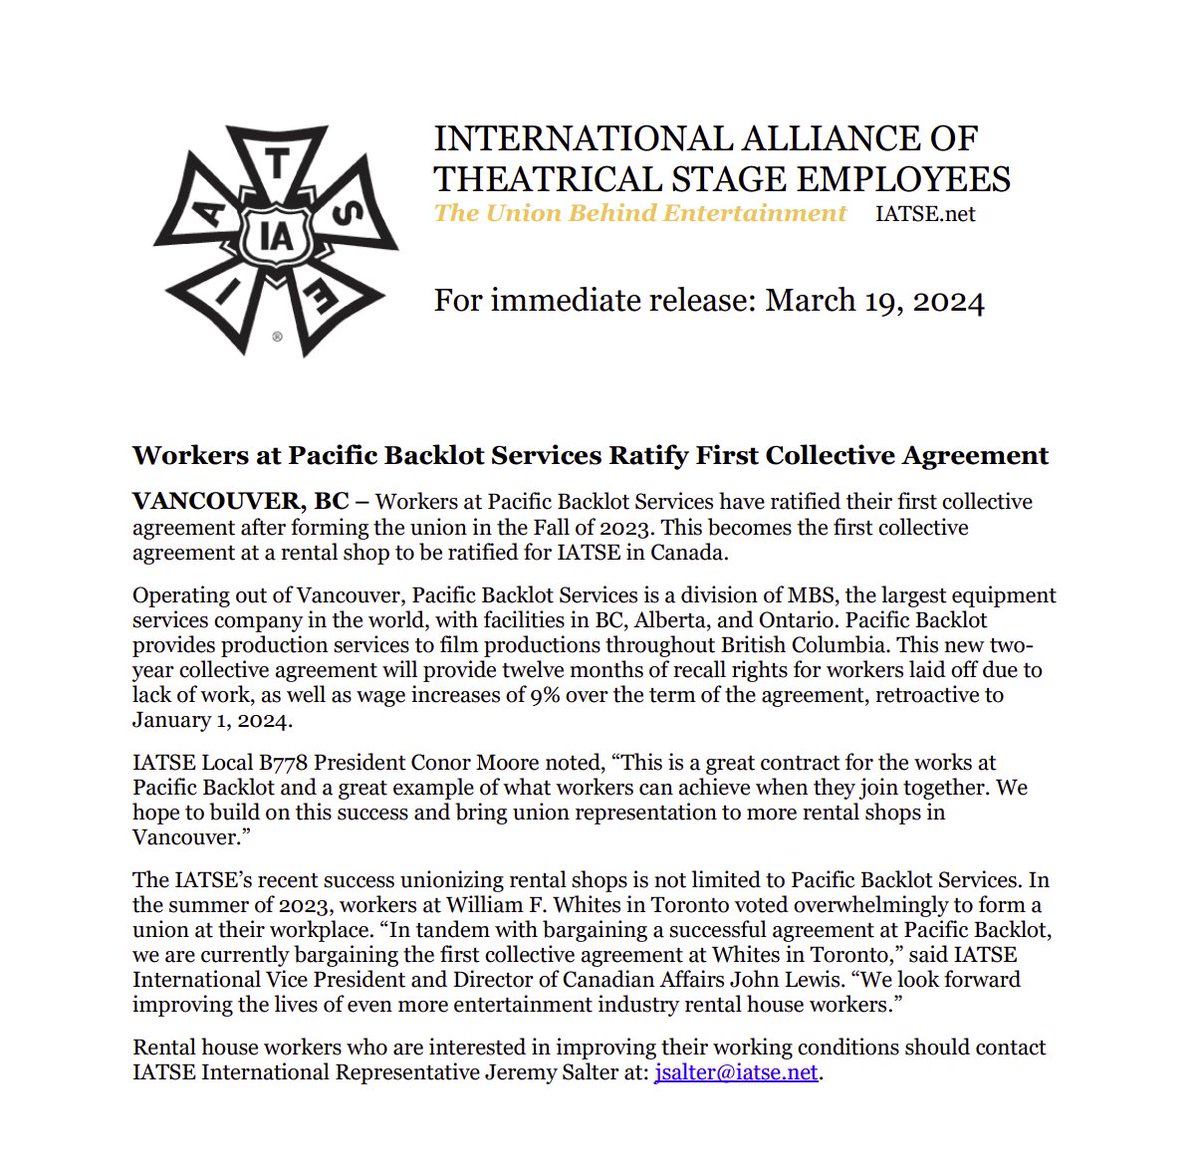 Workers at Pacific Backlot Services have ratified their first collective agreement! This is the first agreement at a rental shop to be ratified for IATSE in Canada. Congratulations!! Communique here: shorturl.at/jzDT1